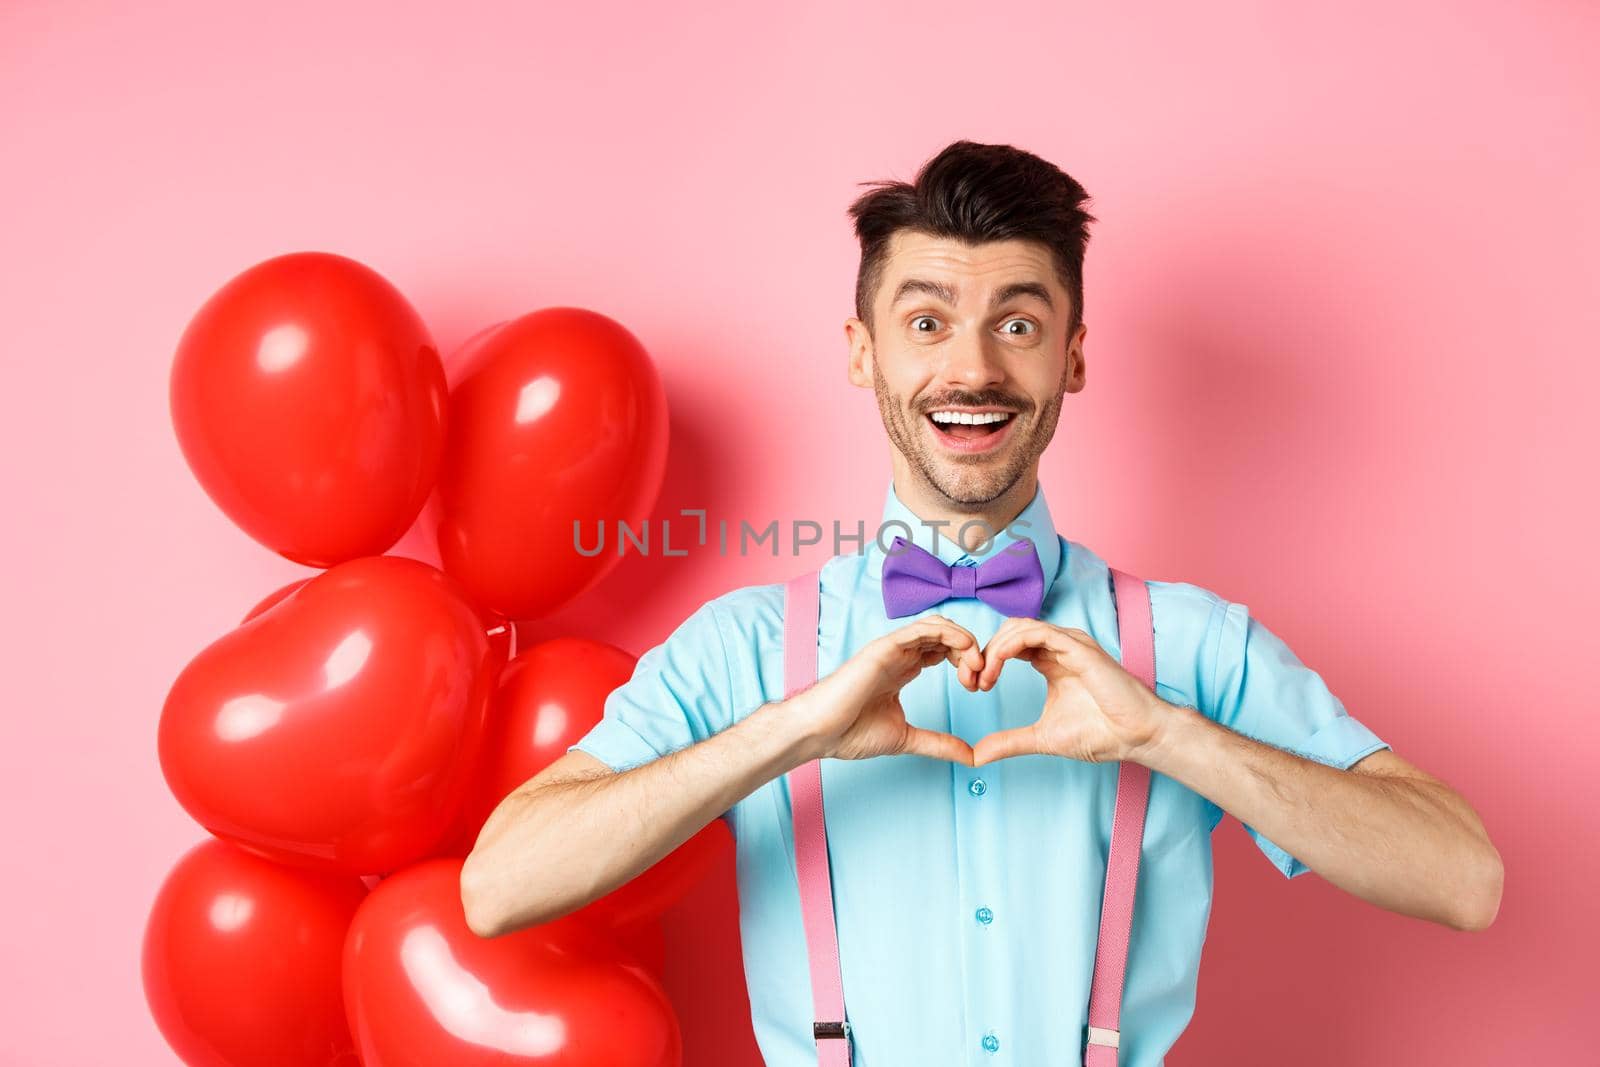 Valentines day concept. Romantic guy looking happy and smiling, showing heart gesture to lover on special anniversary, standing on pink background.